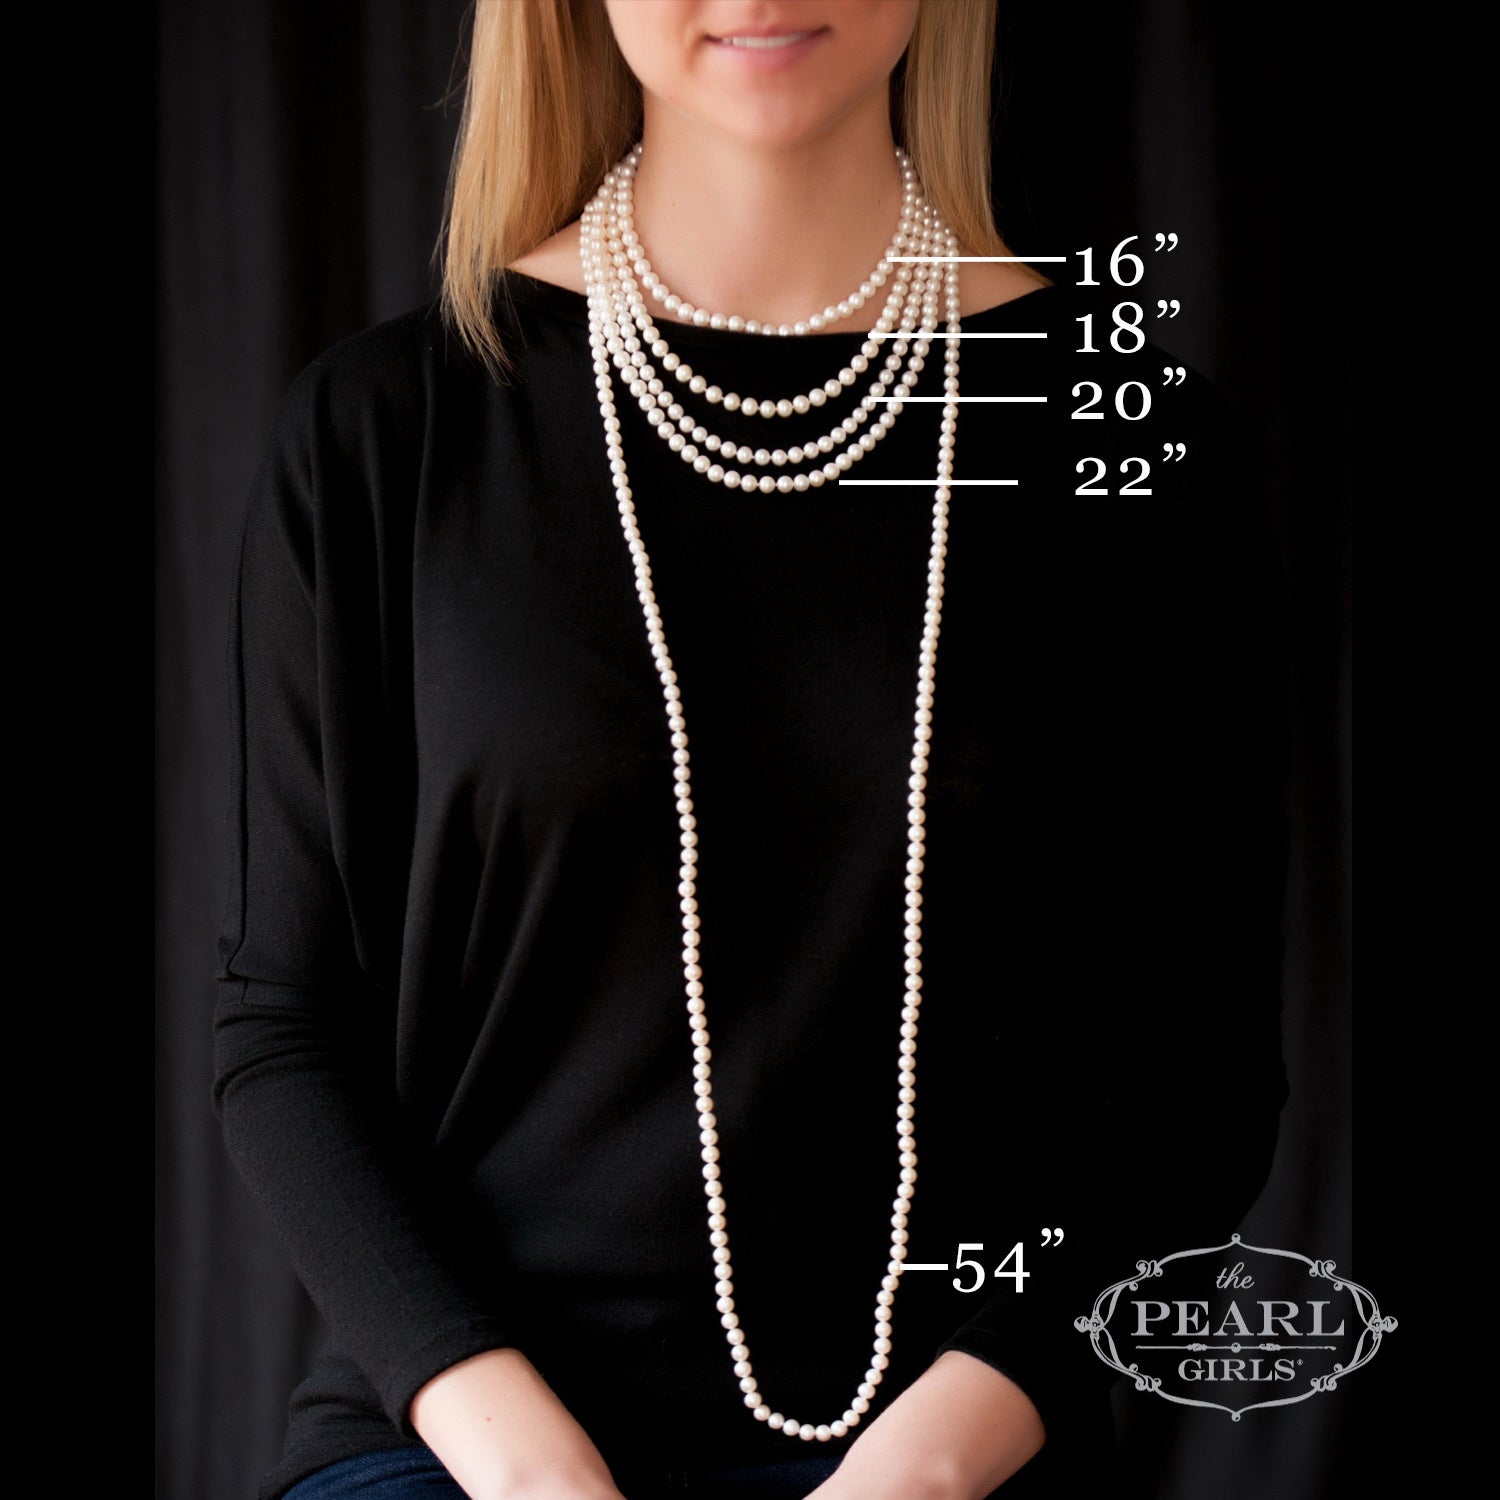 The Pearl Girls pearl necklace lengths